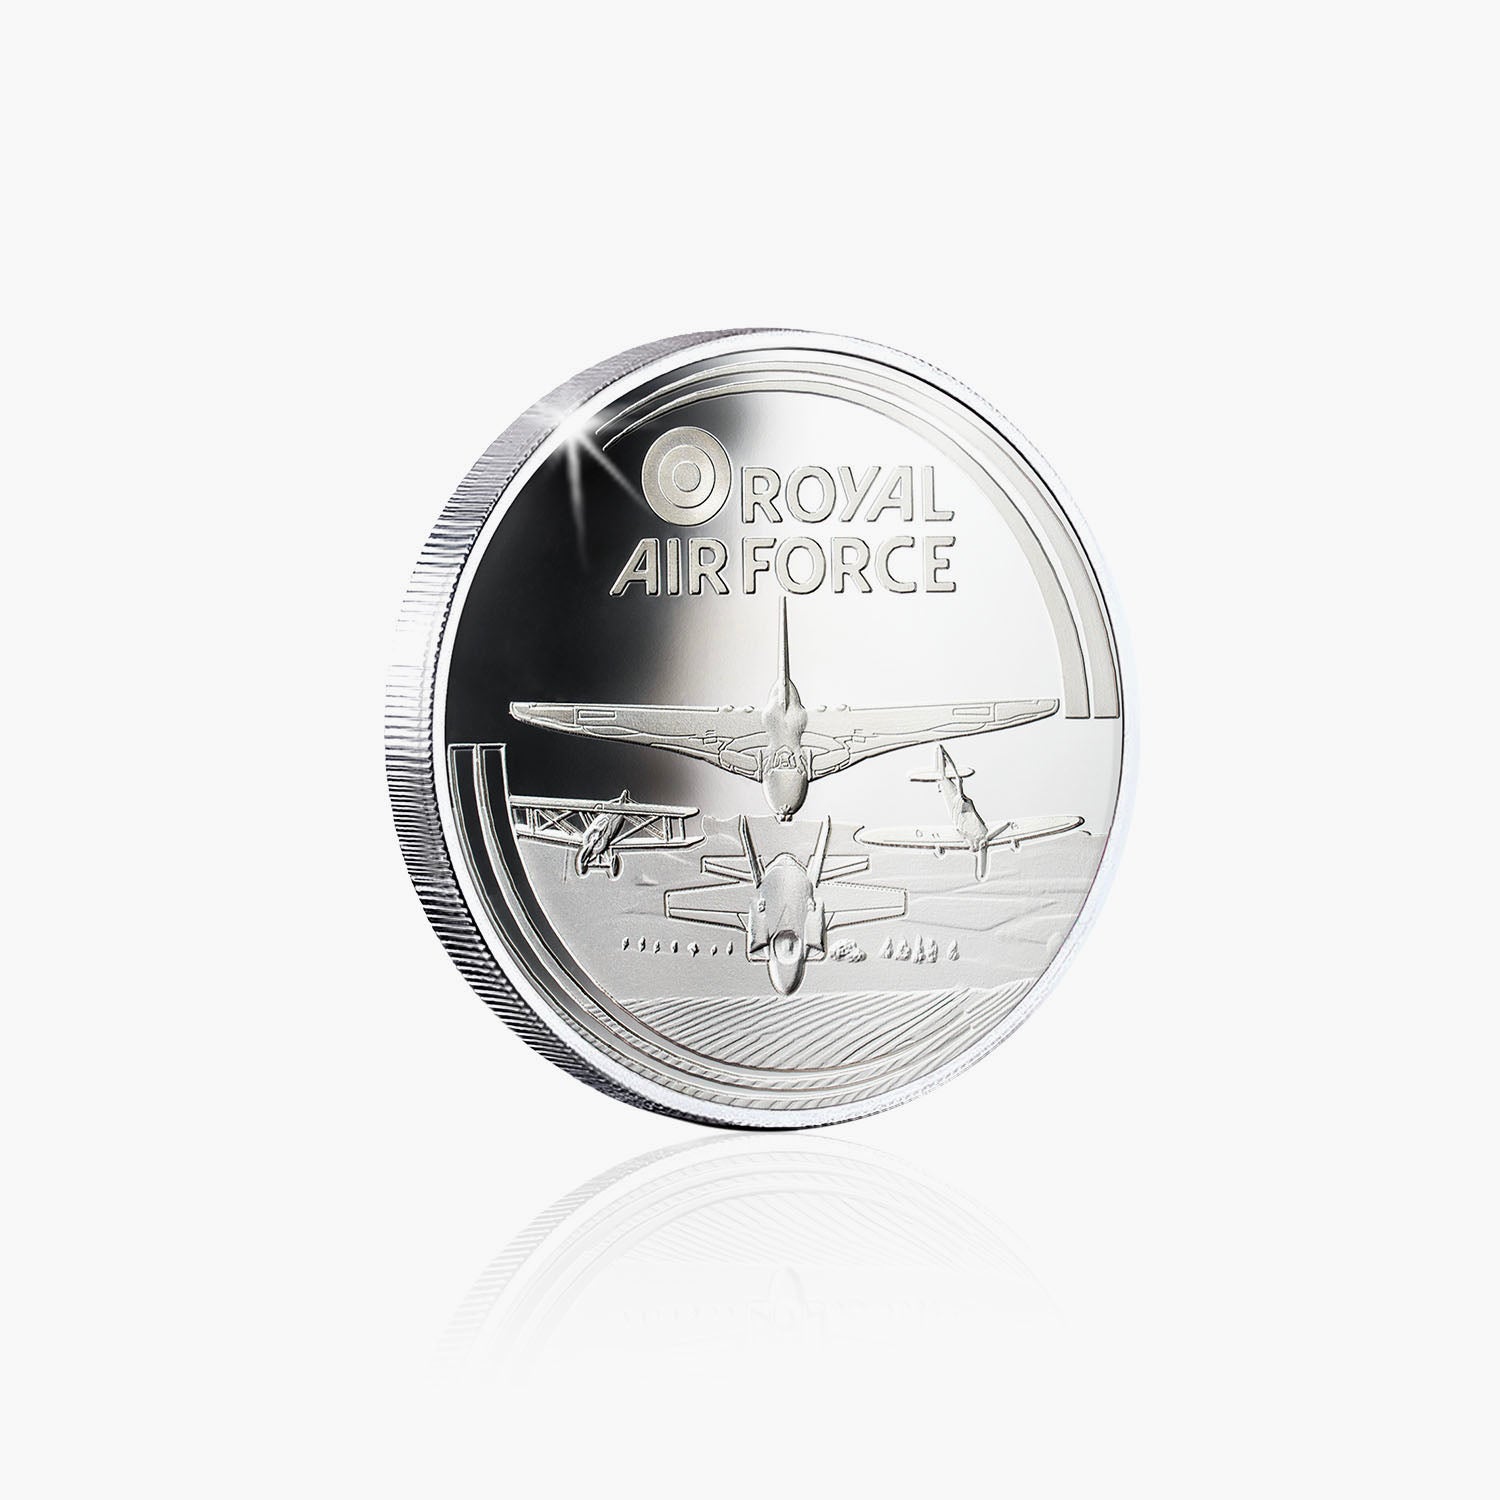 Ascent To The Skies Silver-Plated Commemorative